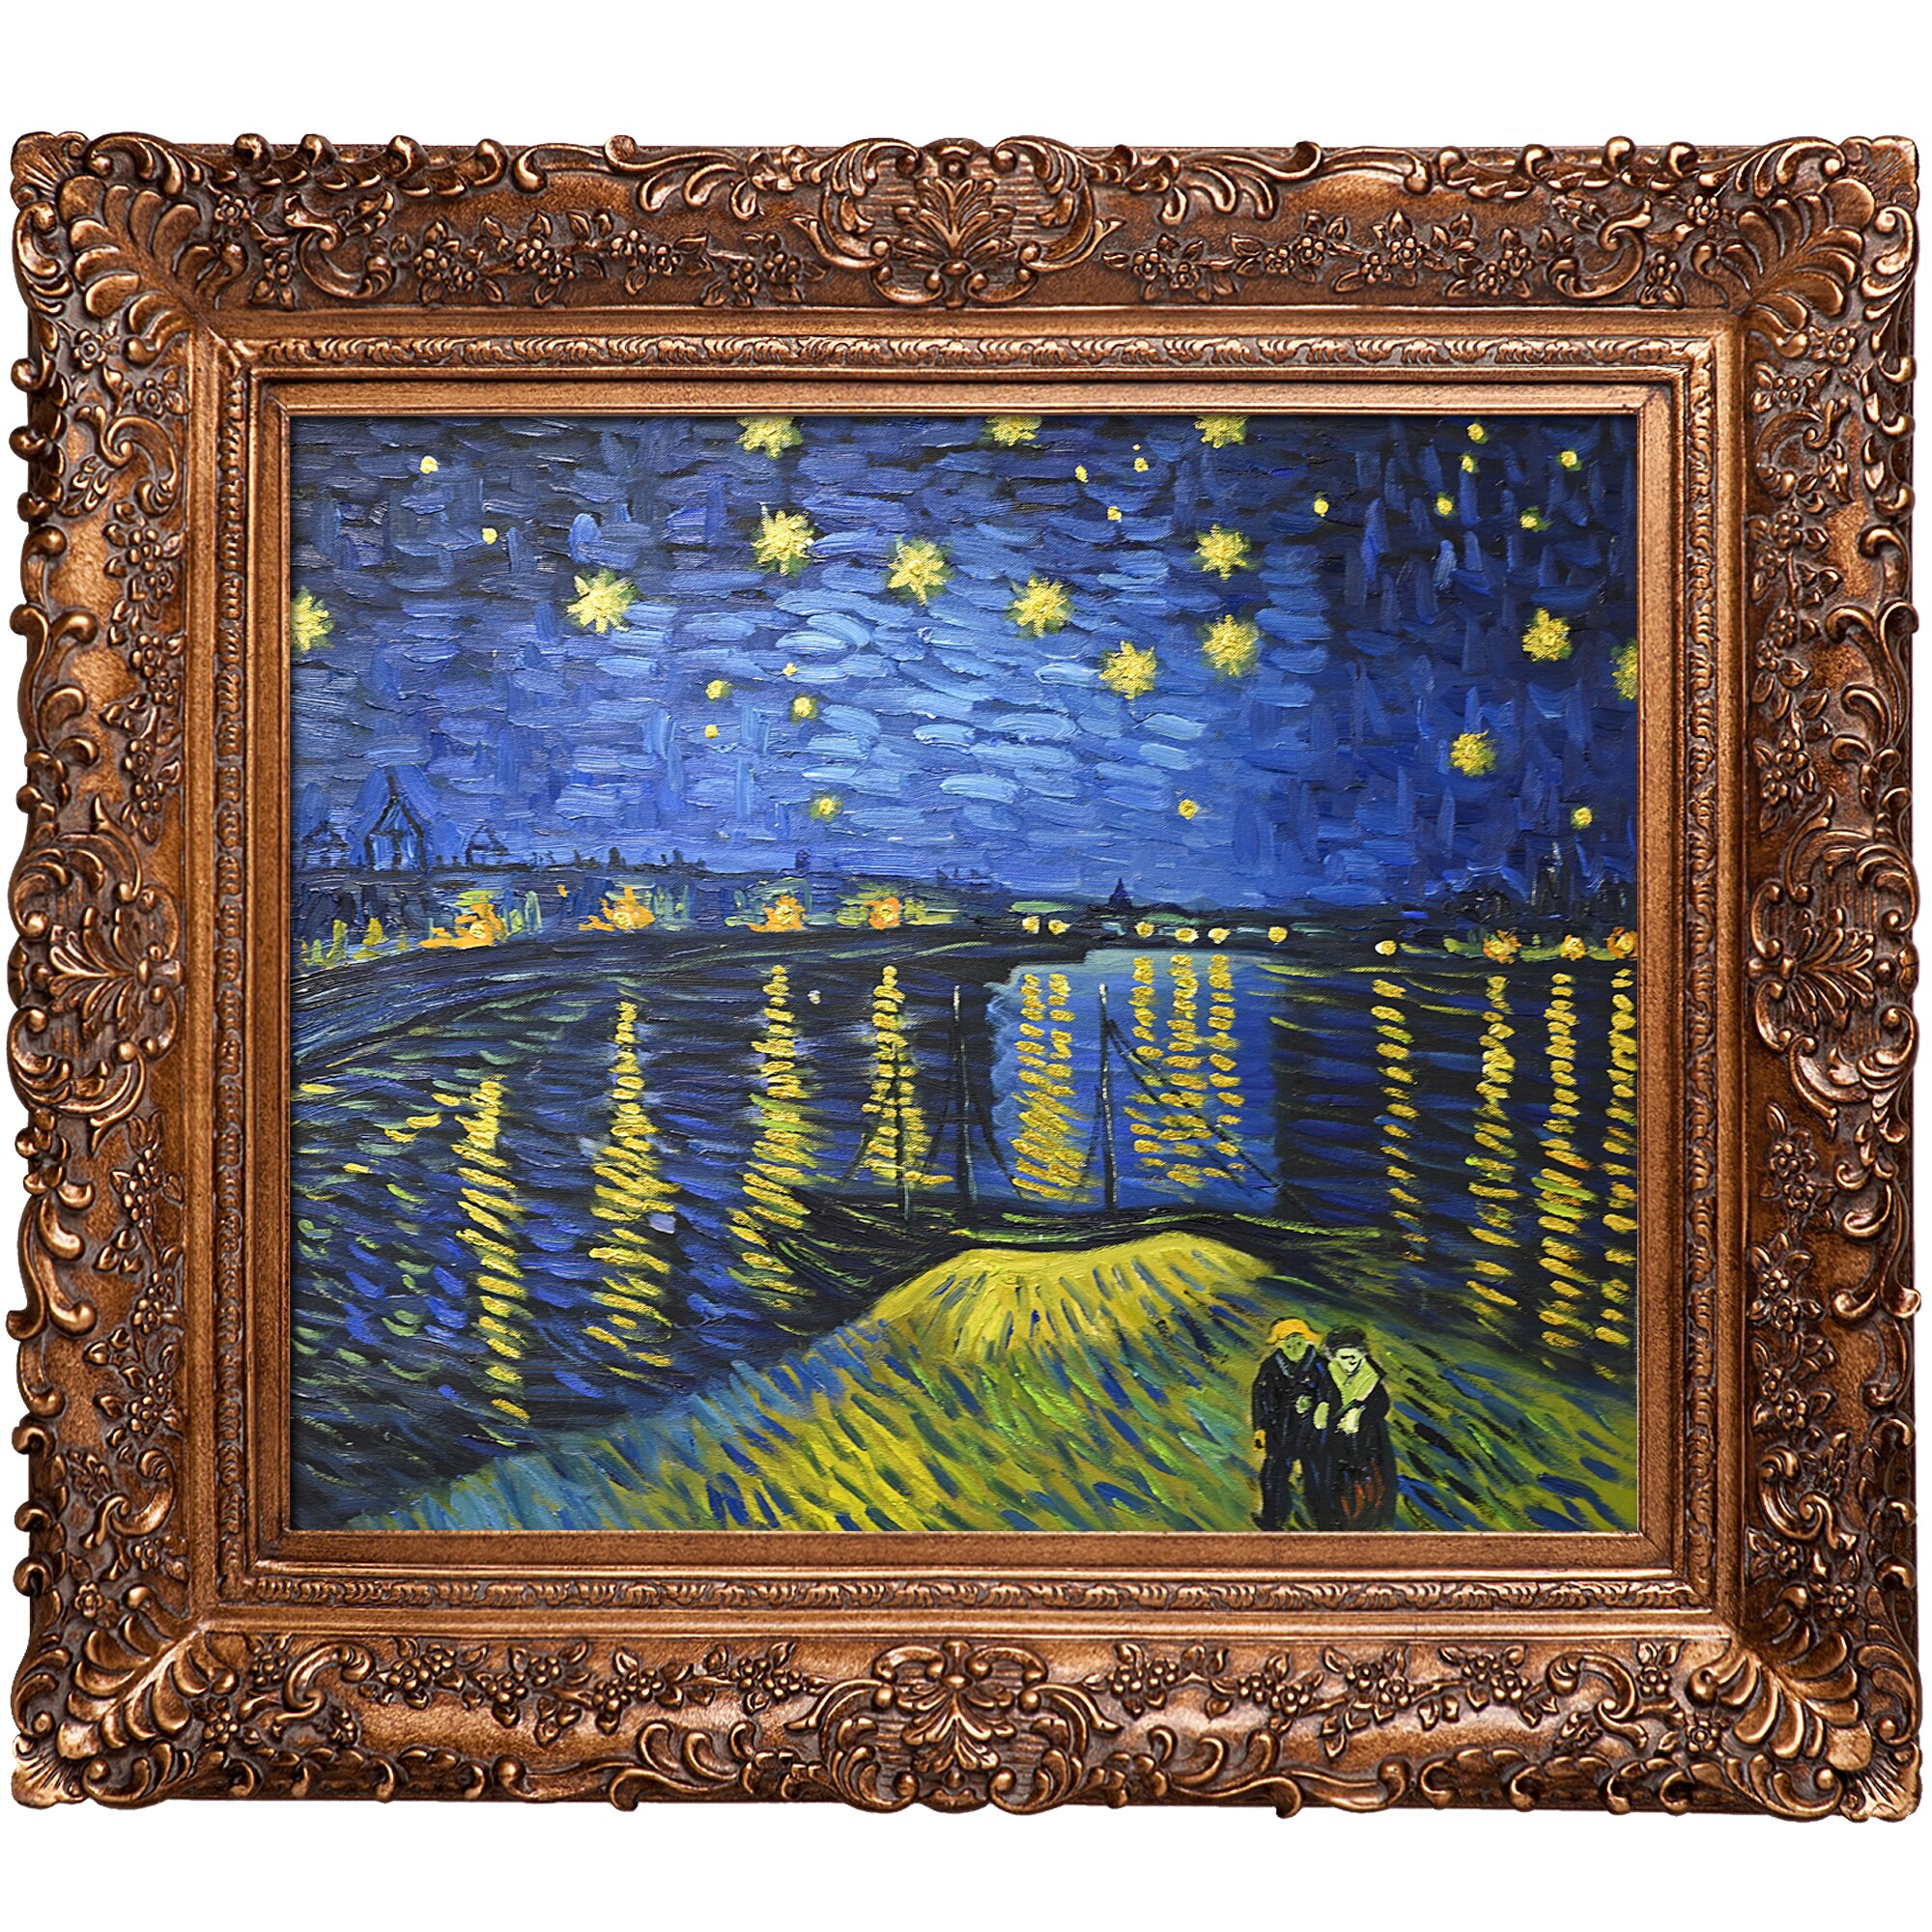 Starry Night Over The Rhone By Vincent Van Gogh Canvas Oil Painting Wall Picture 